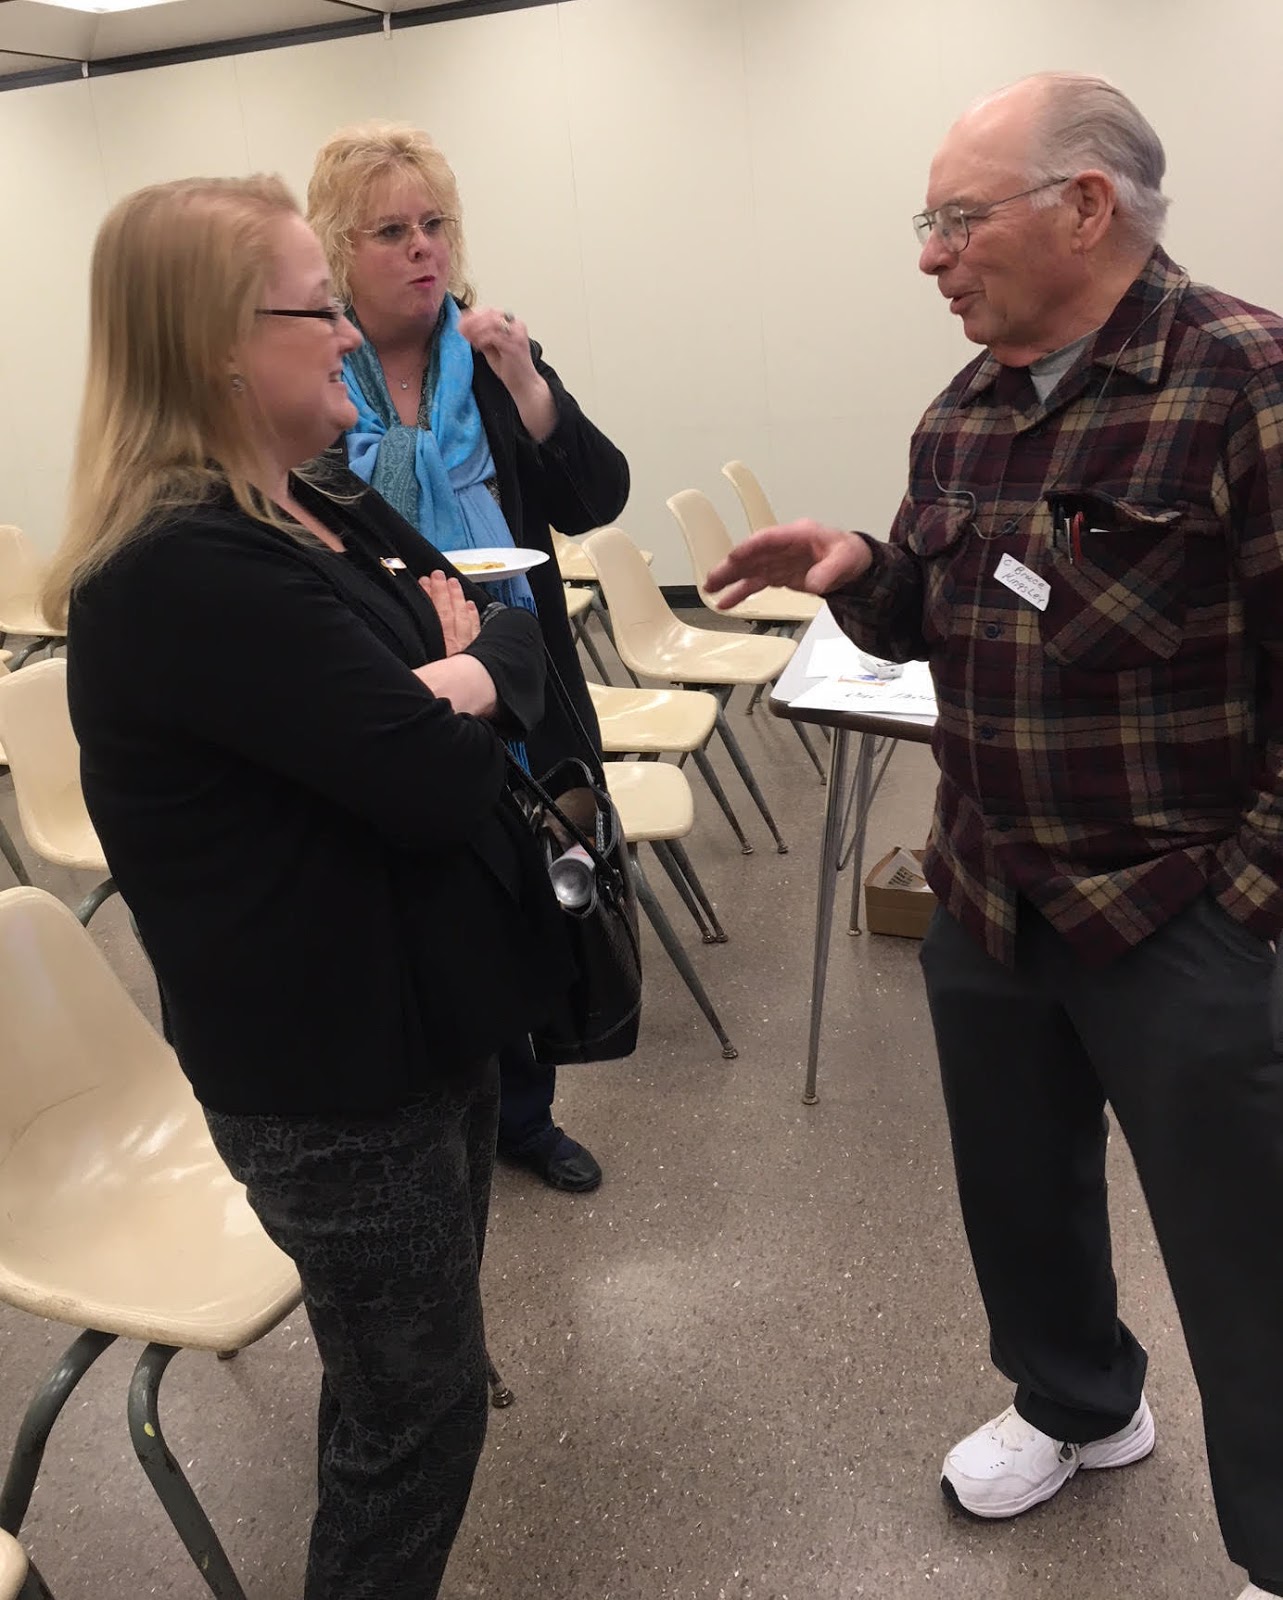 Assemblywoman Addie A.E. Jenne (foreground) and Watertown City Council member Lisa Ruggerio visit with C. Bruce Kingsley, chair of the Jefferson-Lewis Counties chapter of SCOPE